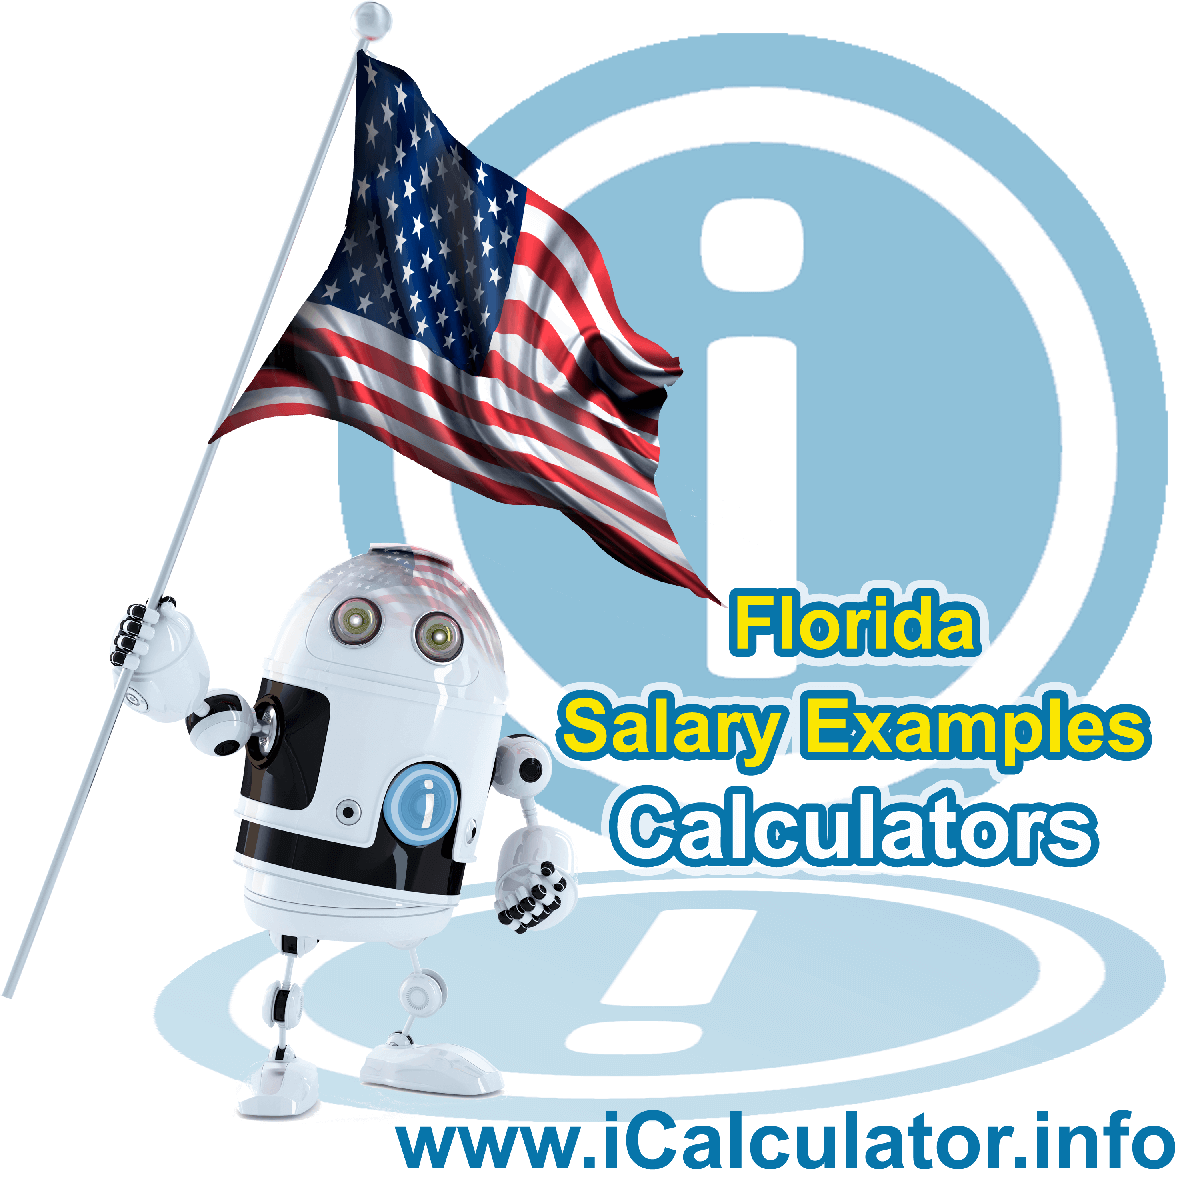 Florida Salary Example for $ 120,000.00 in 2023 | iCalculator™ | $ 120,000.00 salary example for employee and employer paying Florida State tincome taxes. Detailed salary after tax calculation including Florida State Tax, Federal State Tax, Medicare Deductions, Social Security, Capital Gains and other income tax and salary deductions complete with supporting Florida state tax tables 